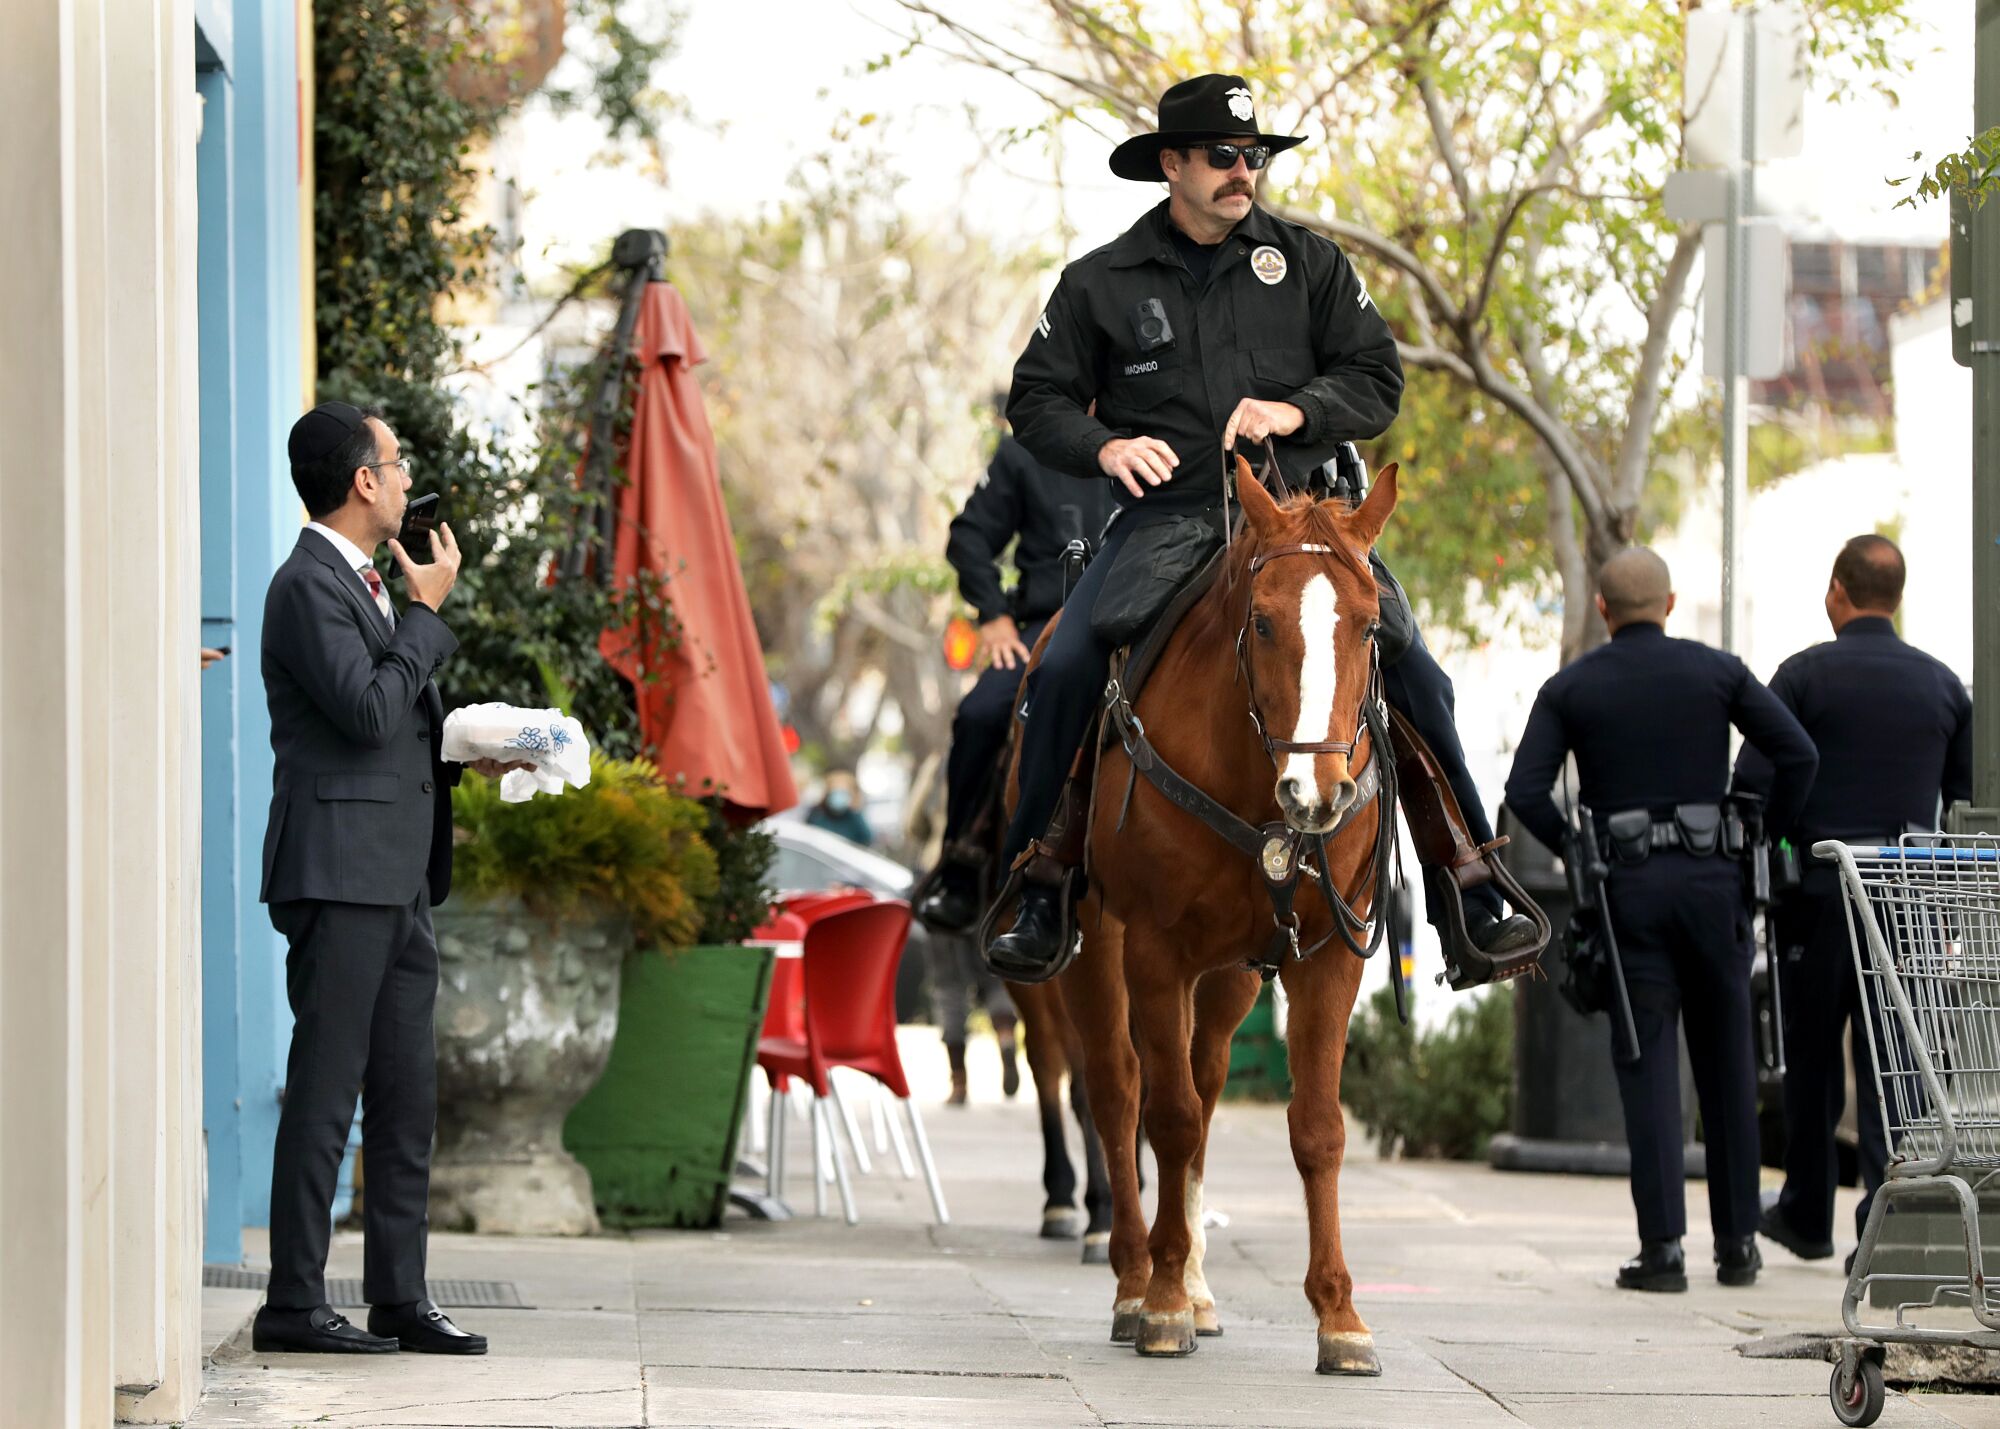 LAPD officers on horseback patrol along Pico Boulevard while a passerby looks on.